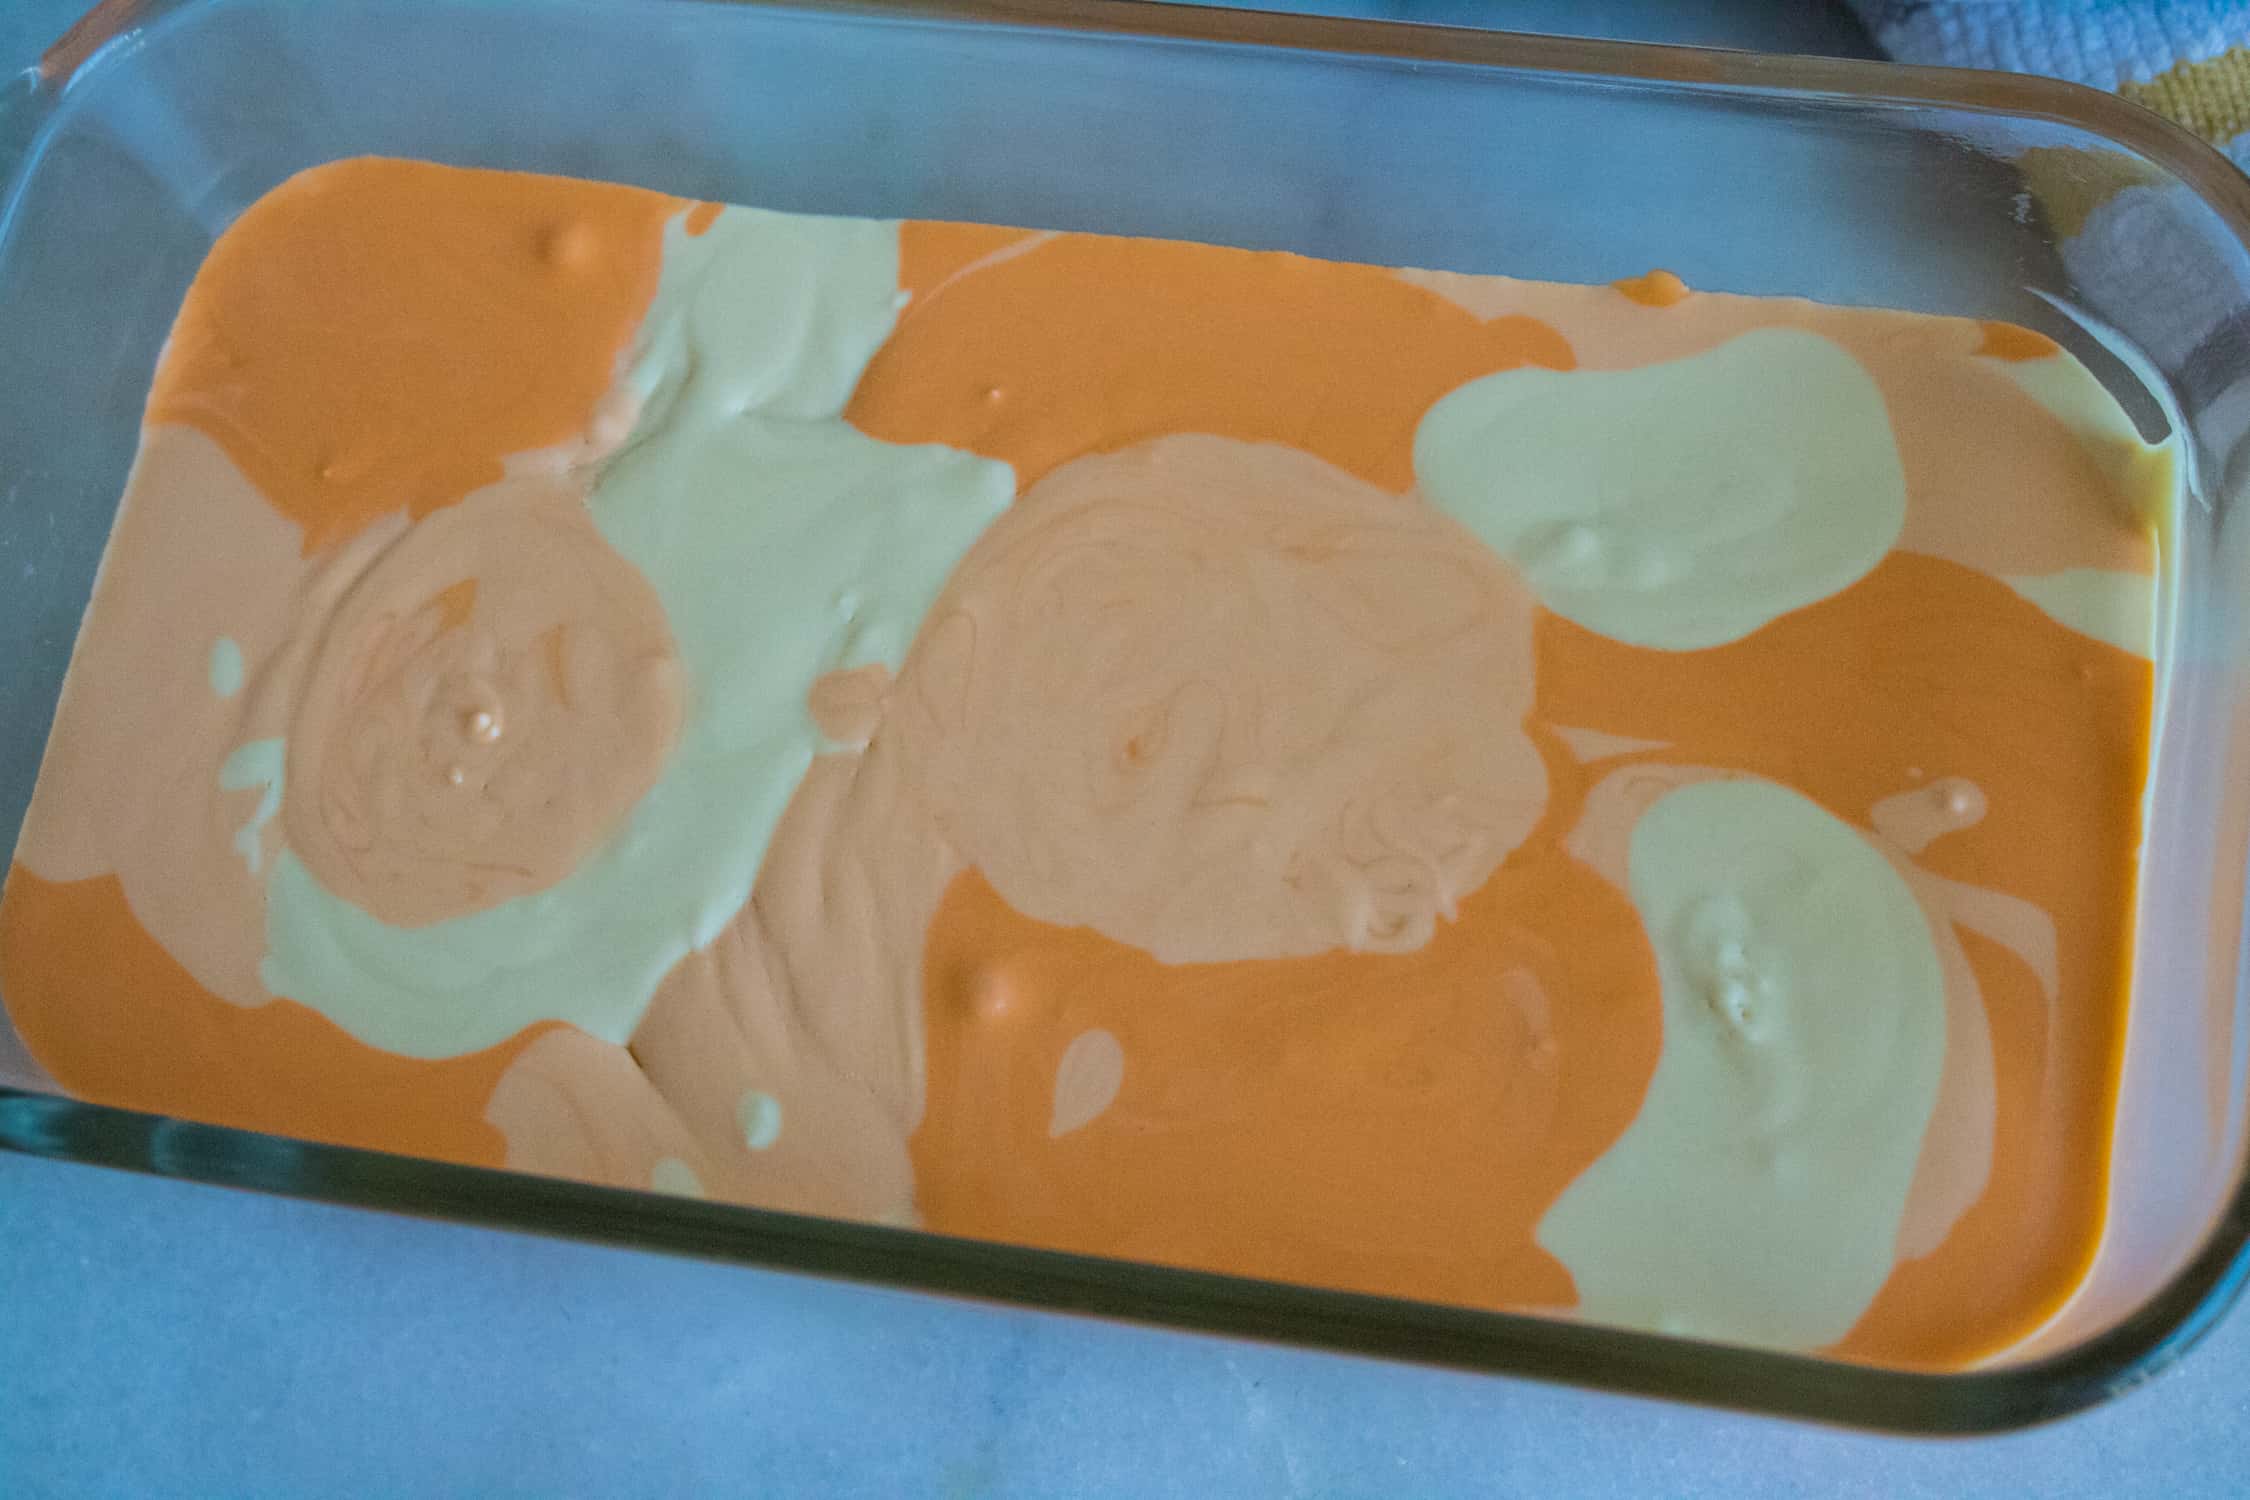 top-down view of the Orange Creamsicle No-Churn Ice Cream inside a glass bread pan